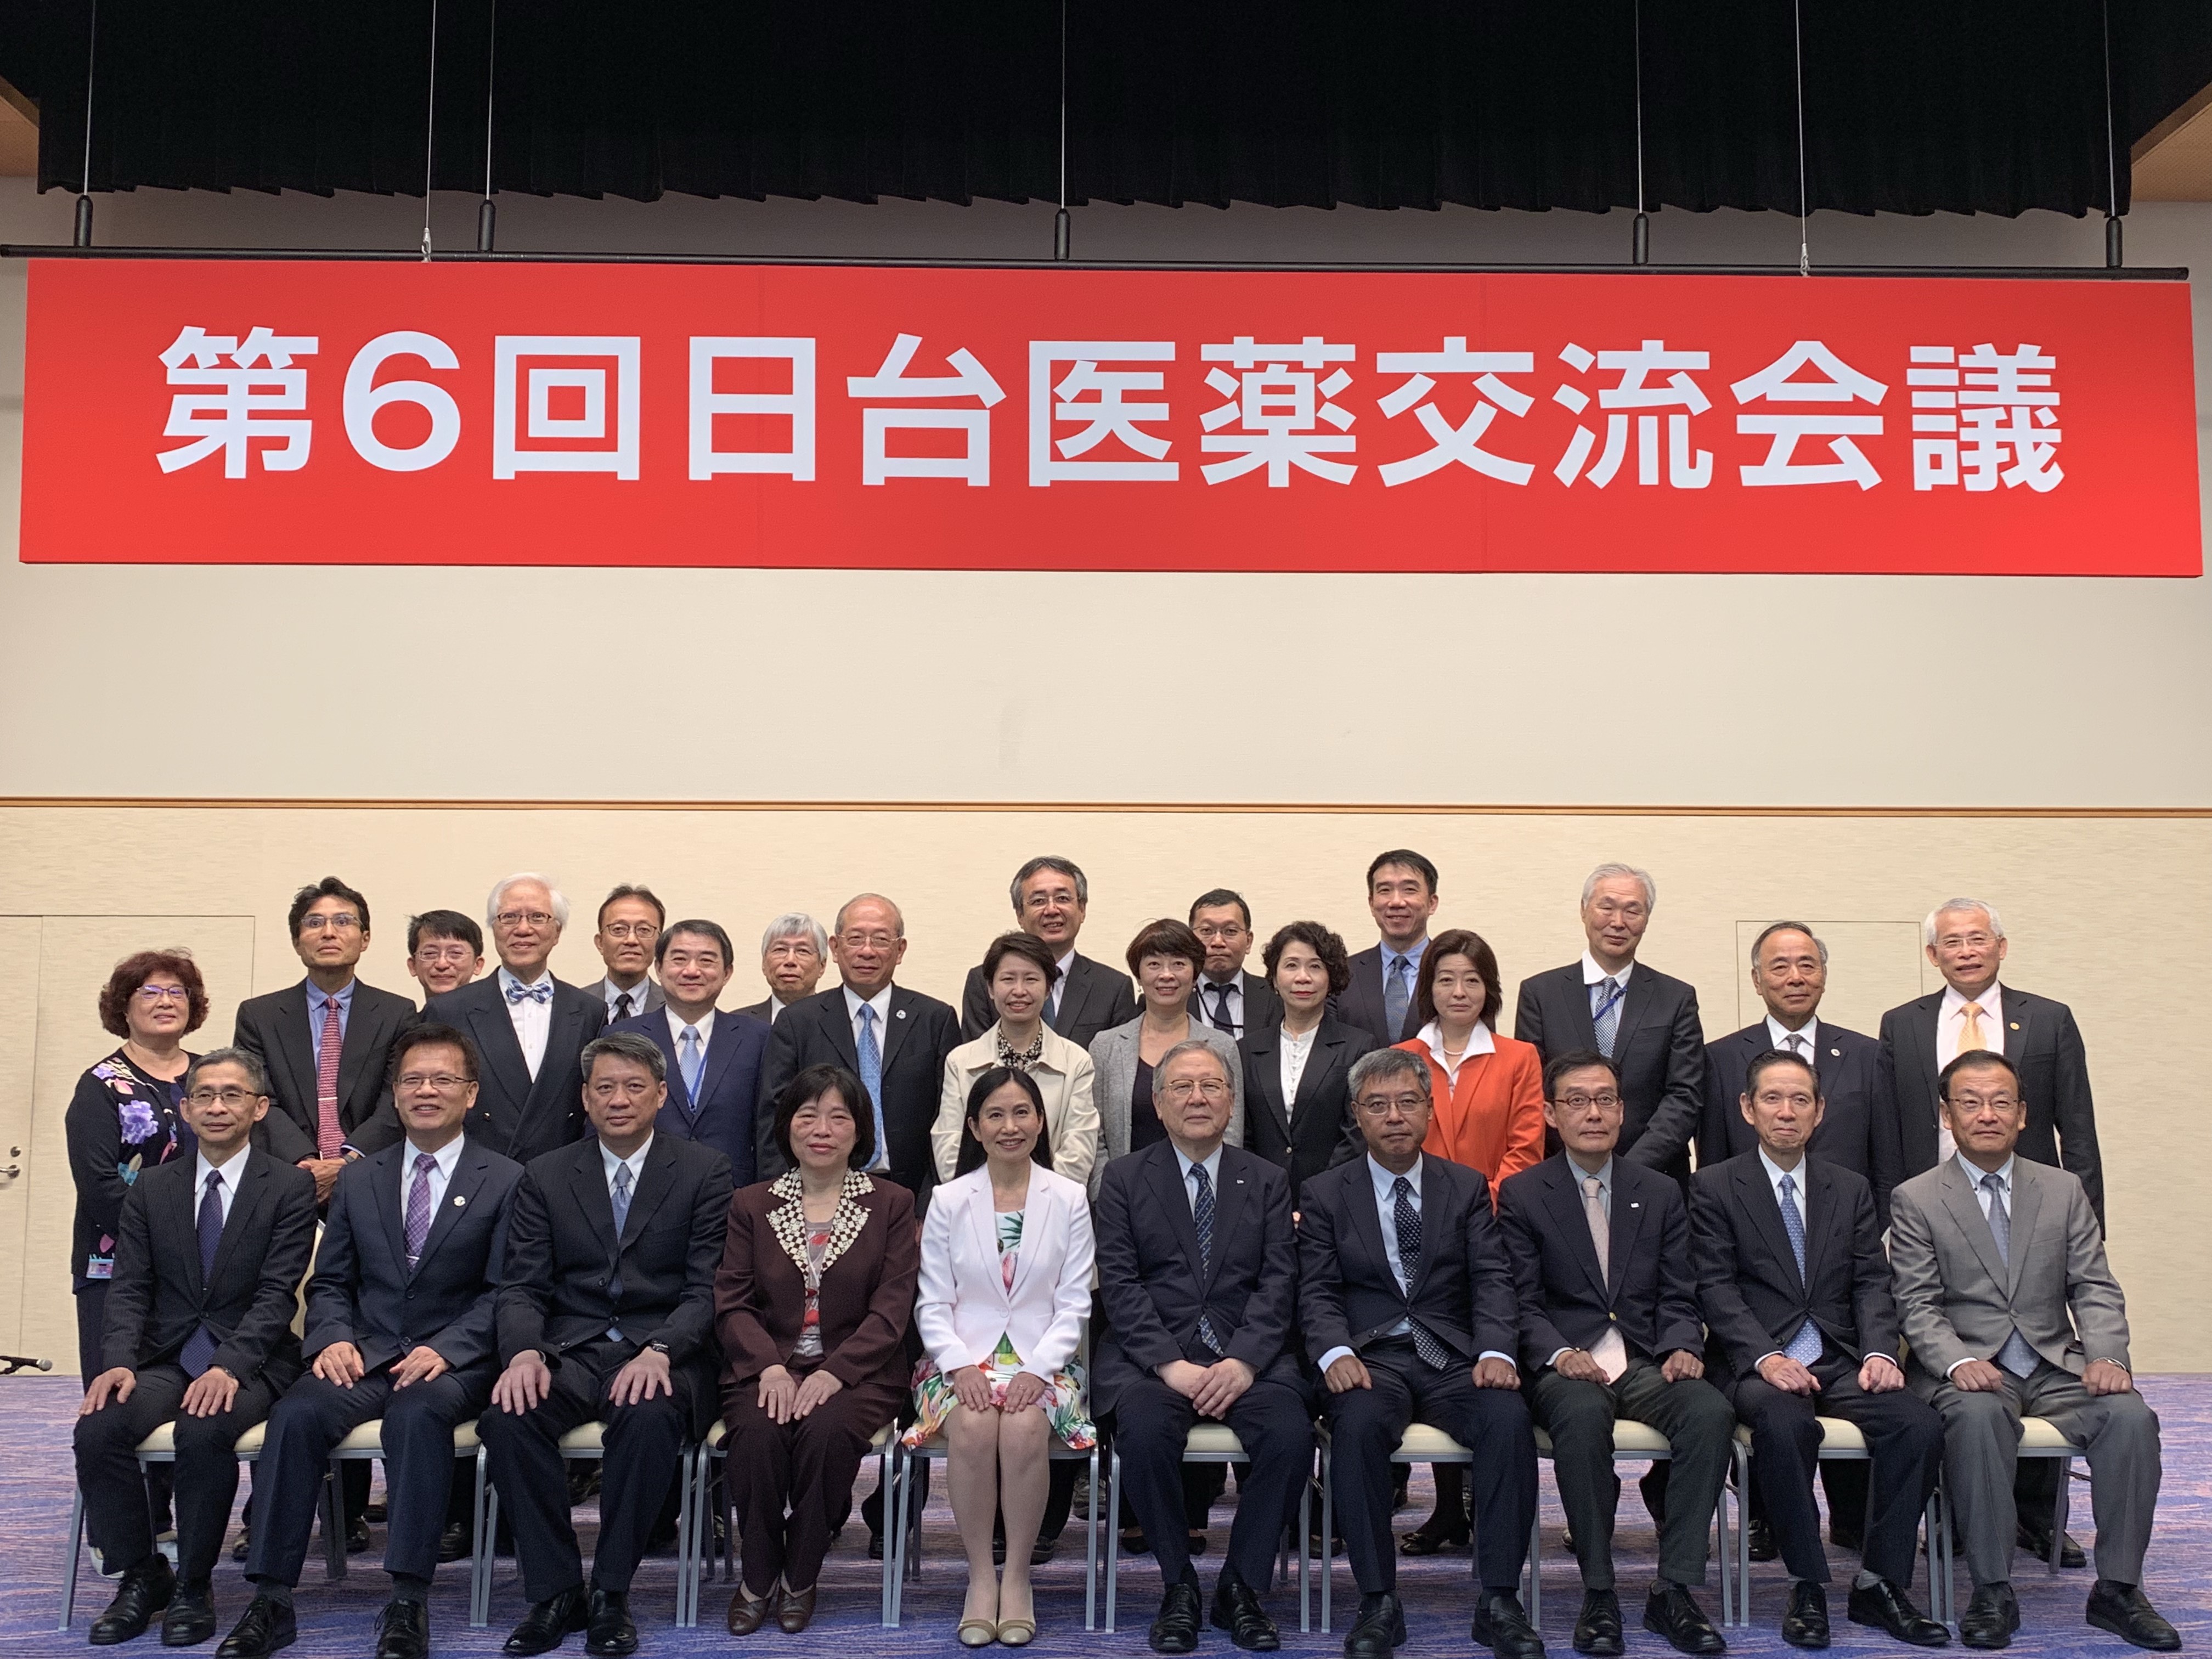 6th Joint Conference of Taiwan and Japan on Medical Products Regulation